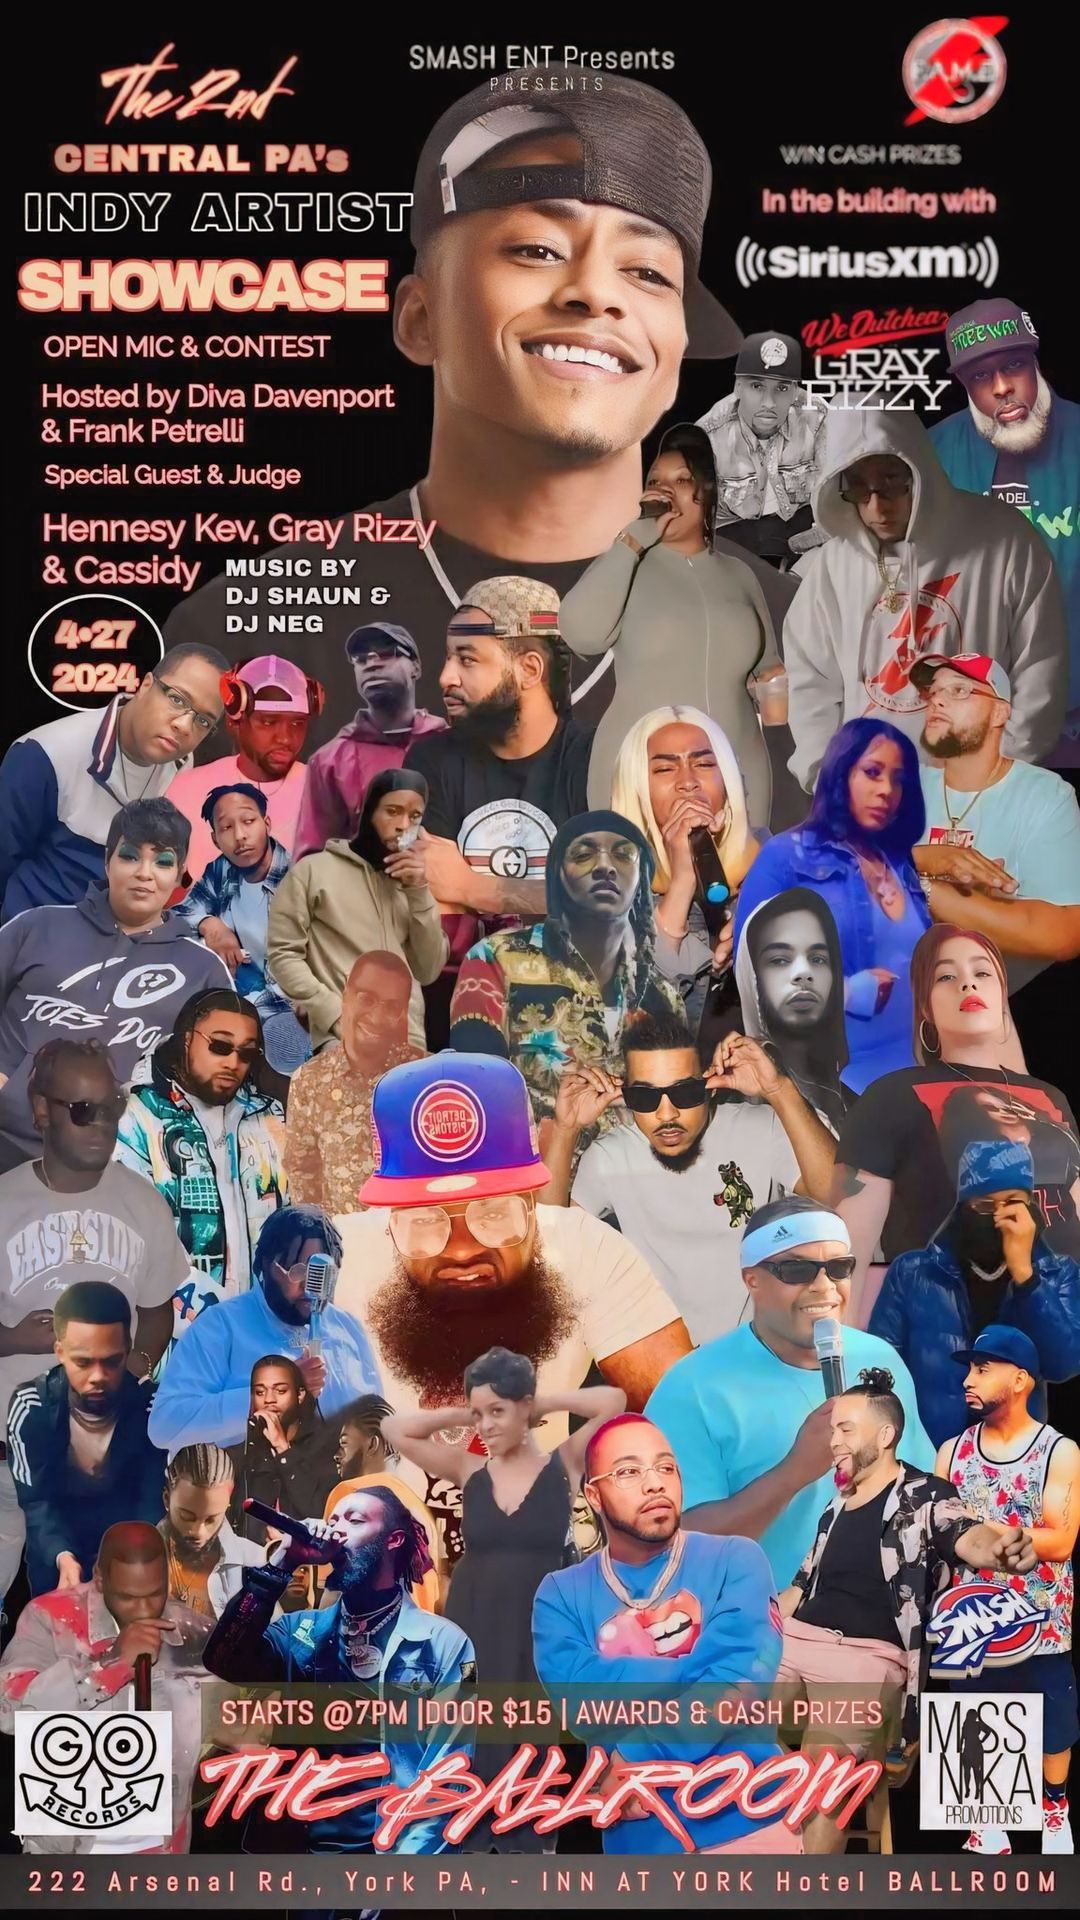 The 2nd CENTRAL PA\u2019s INDY ARTIST SHOWCASE with CASSIDY & SHADE 45\u2019s GRAY RIZZY 